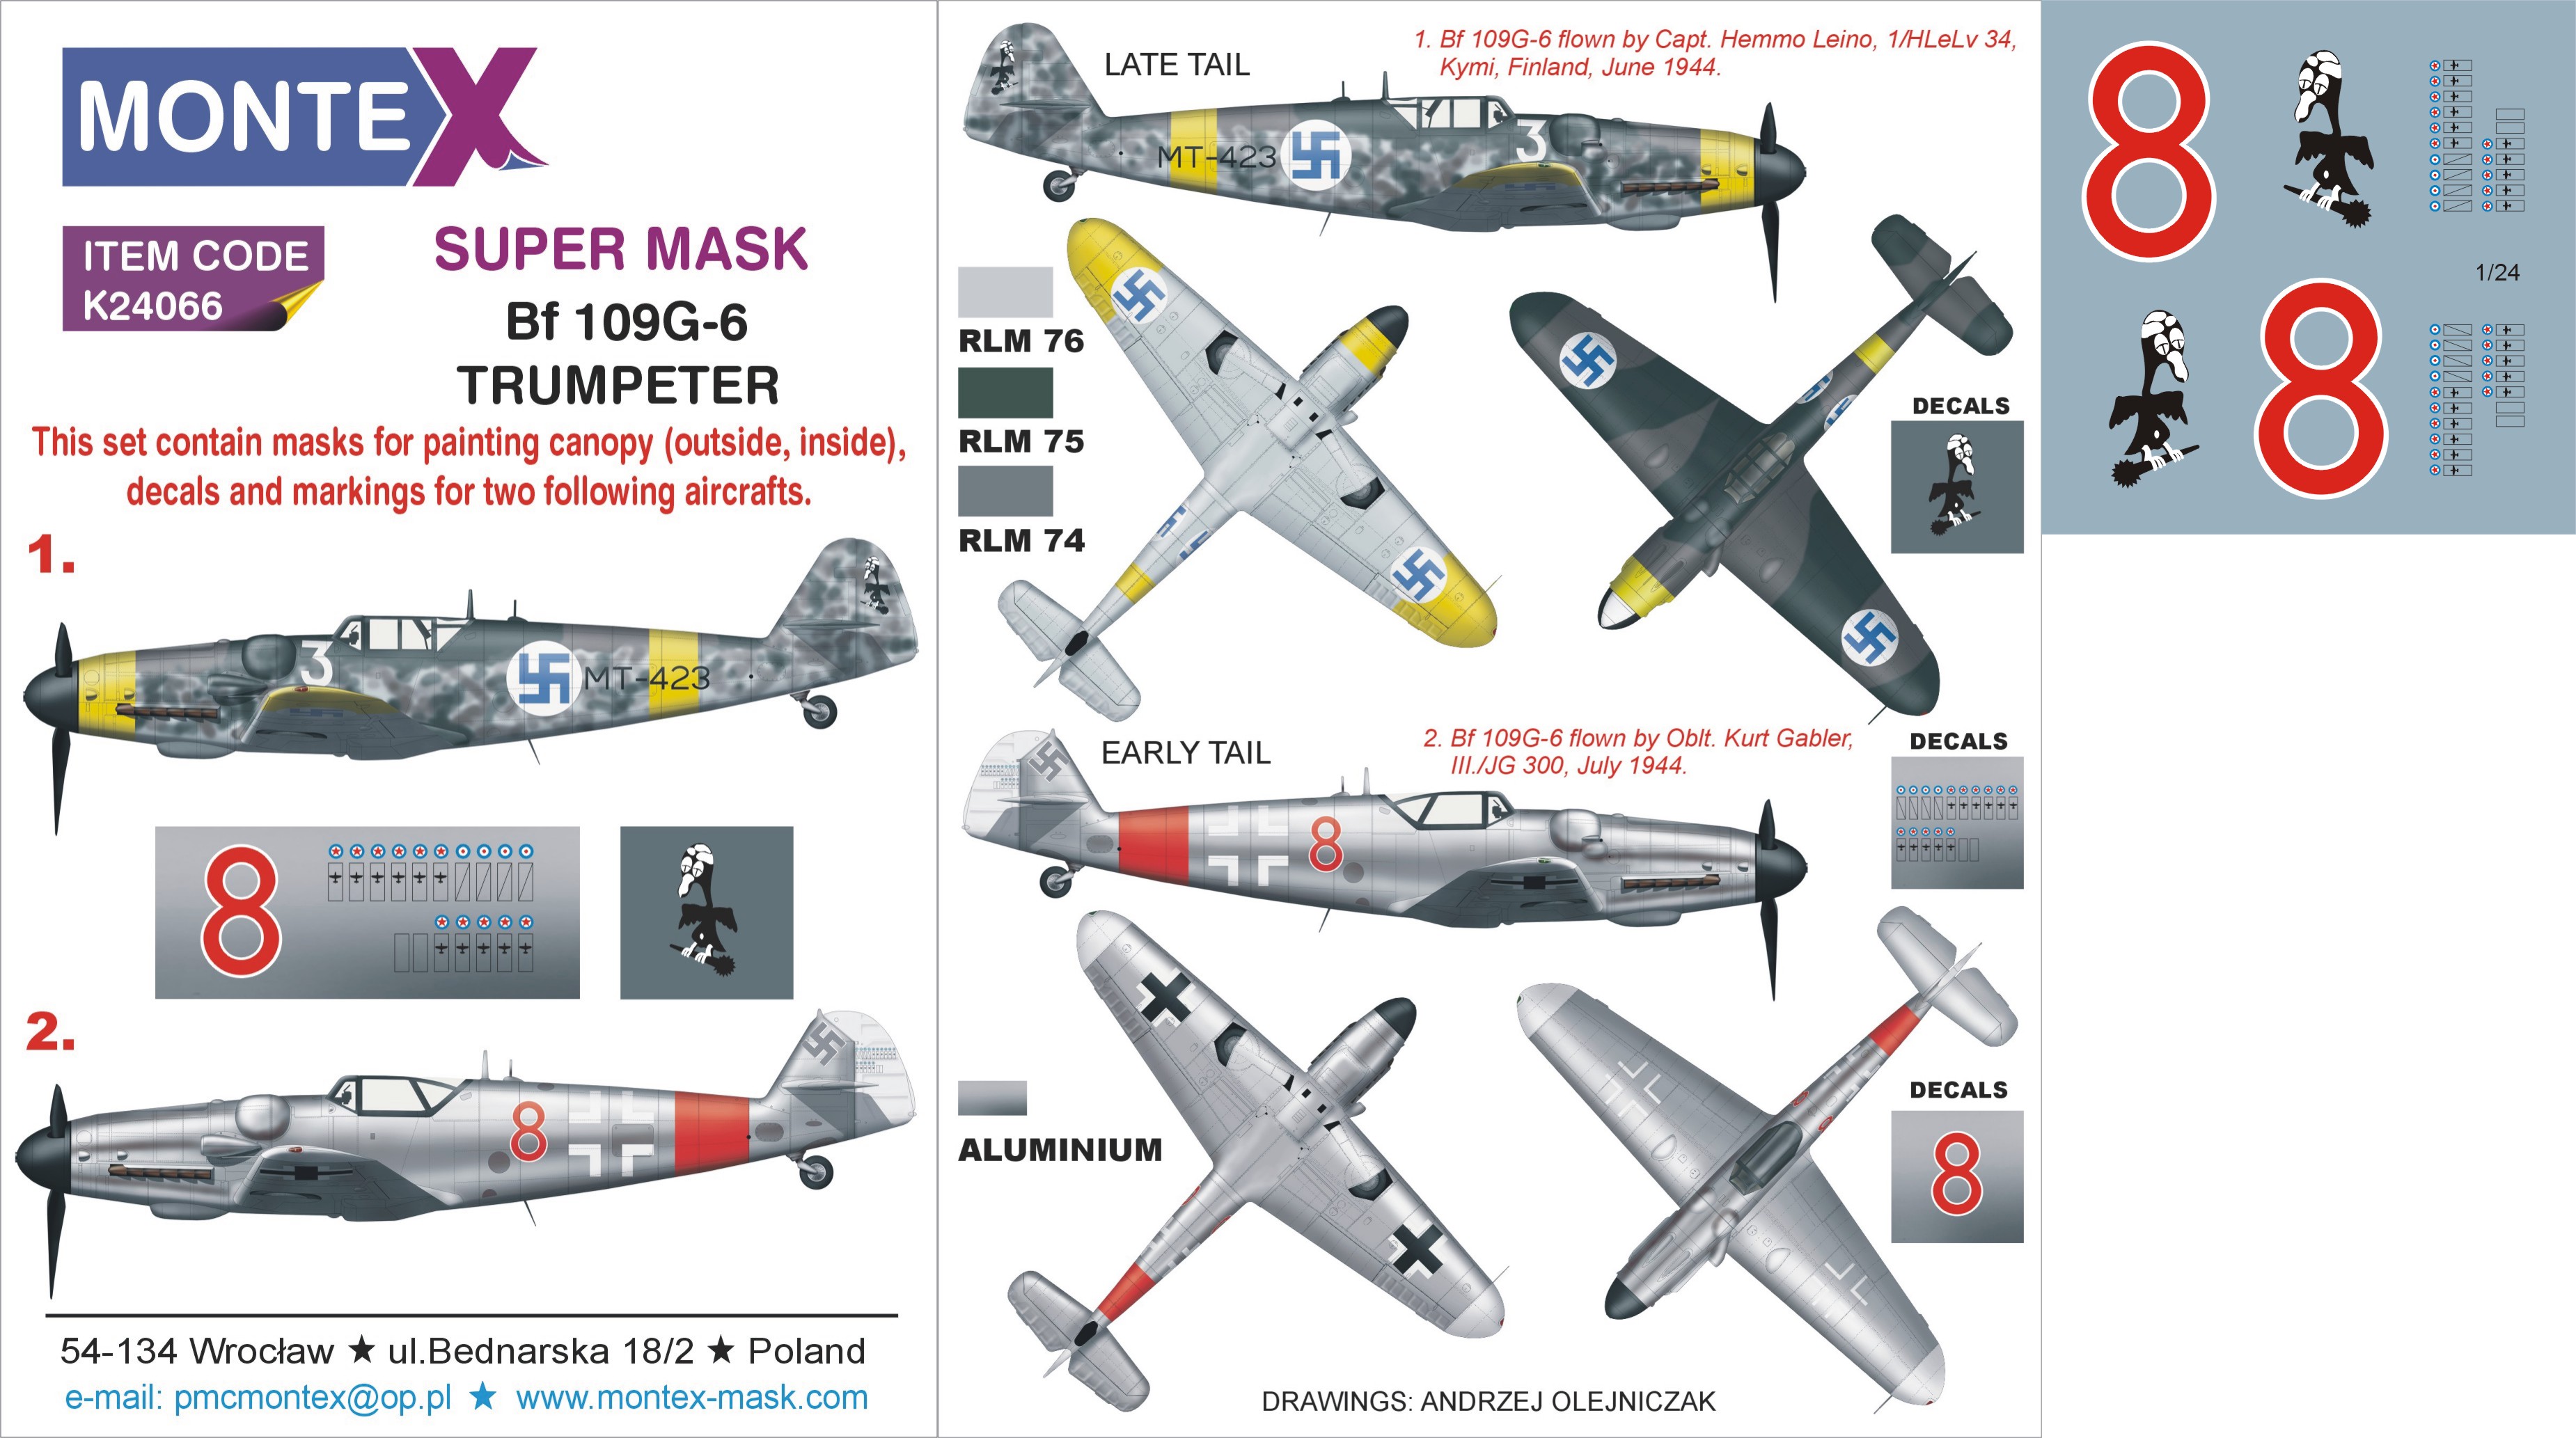 K24077 Montex 1/24 mask for HURRICANE IIC by TRUMPETER